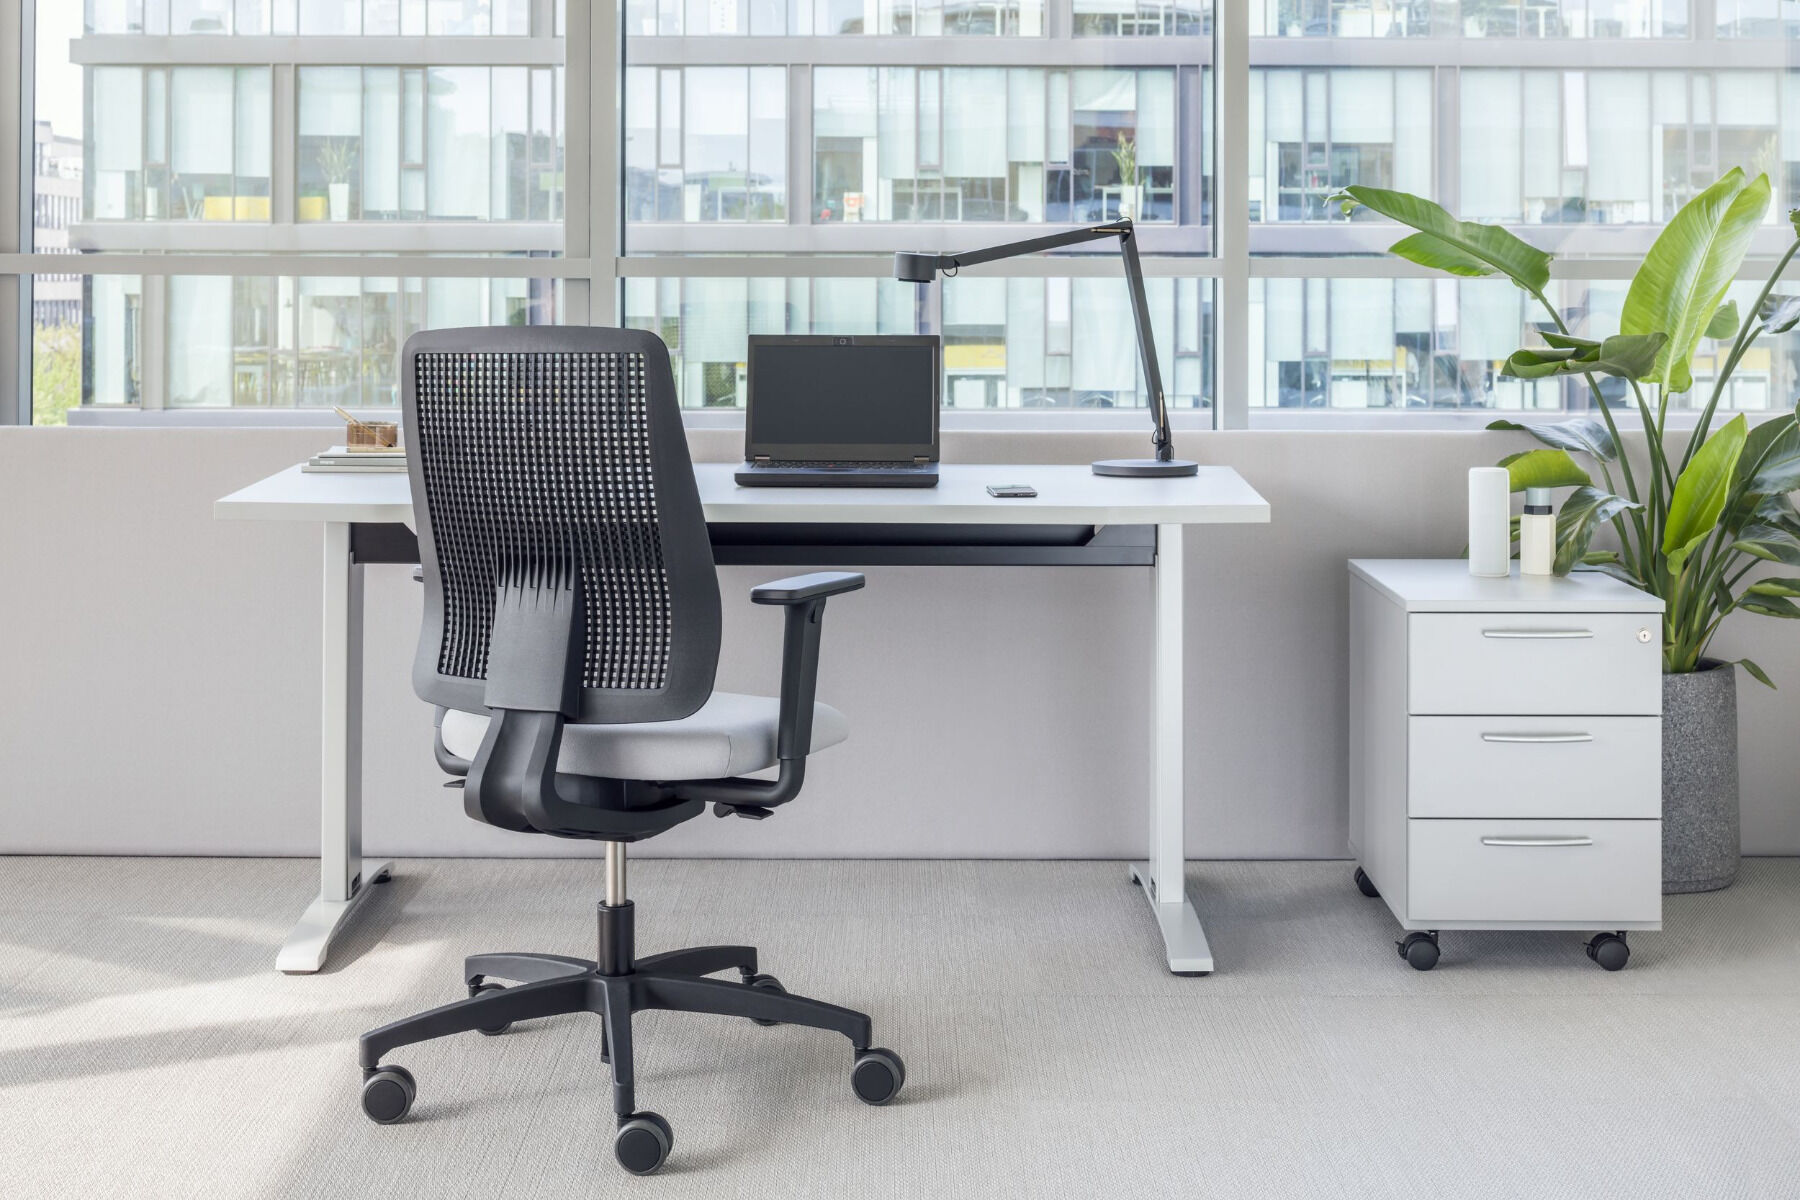 From Back Pain to Bliss: How a Great Office Chair Can Transform Your Health